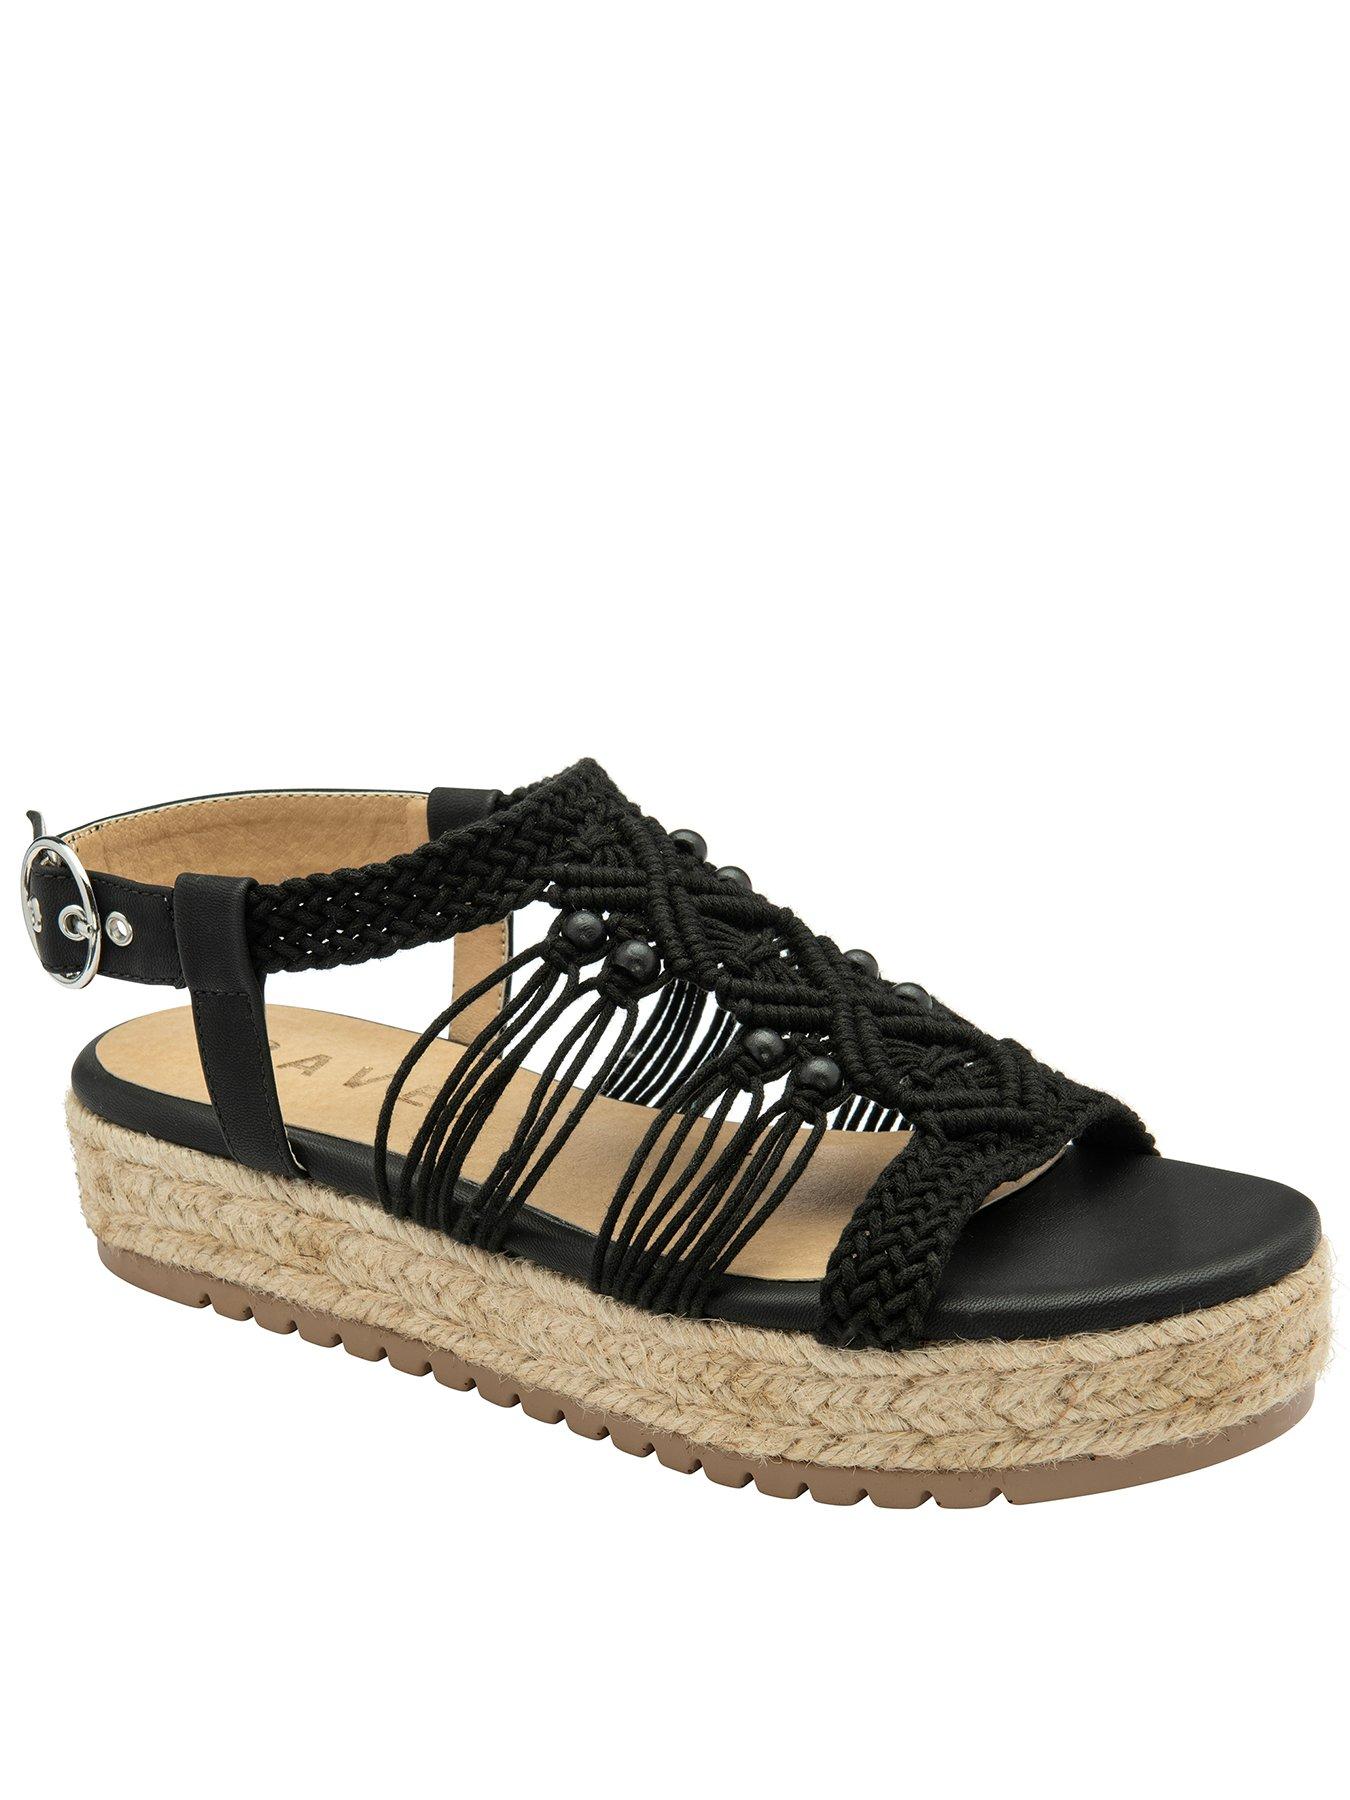 New Look Off White Leather-Look Strappy Espadrille Wedge Heel